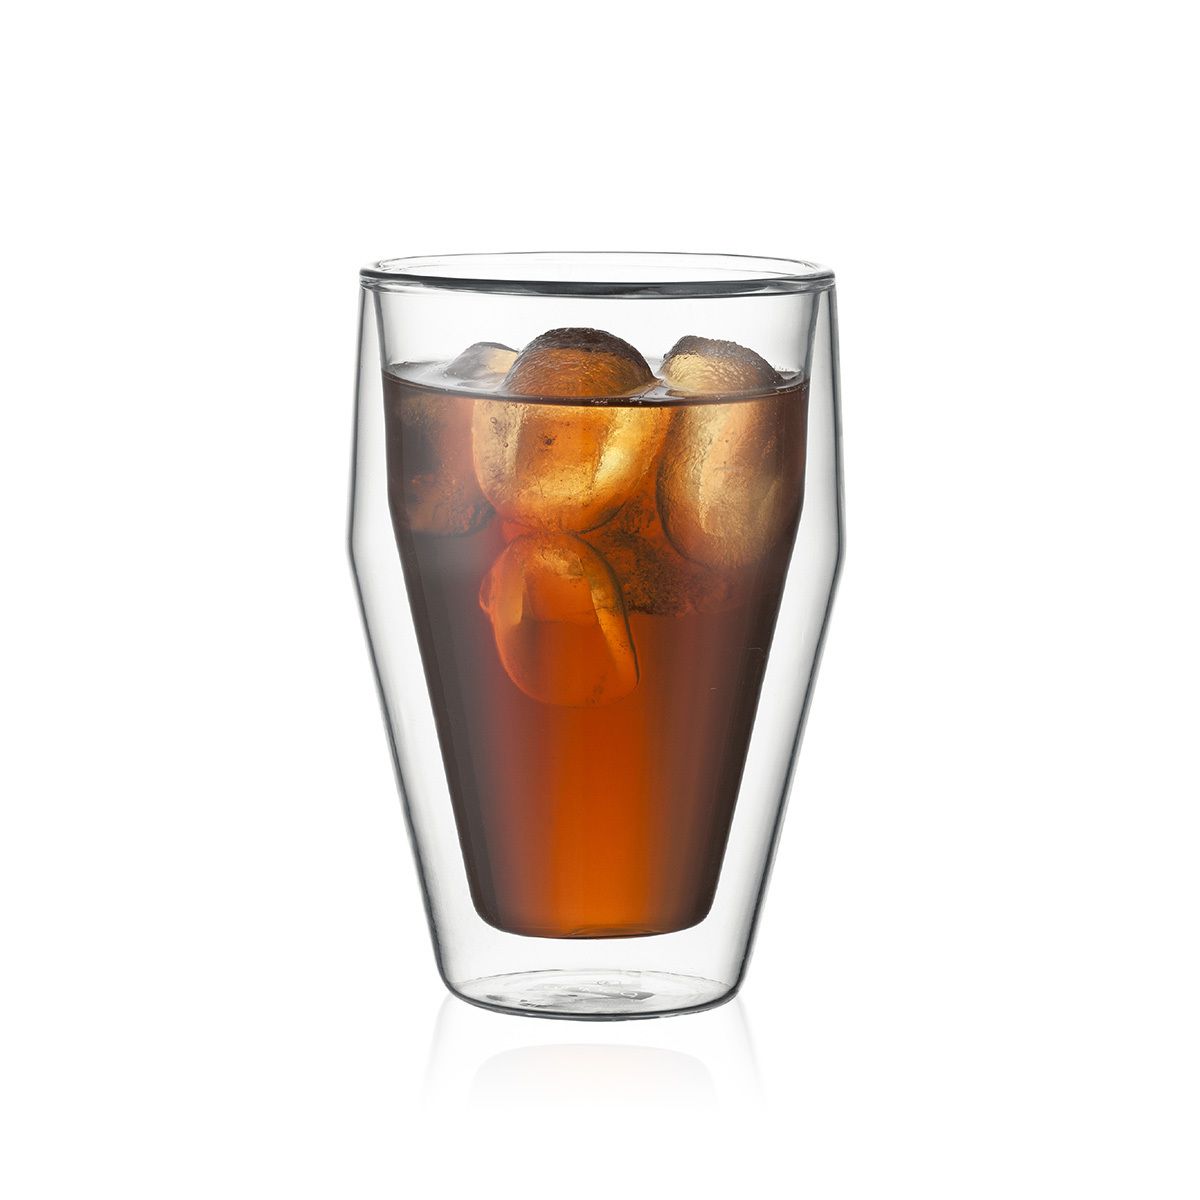 Bodum Titlis Glass Double Walled Racted 0.35 L, 6 PC.